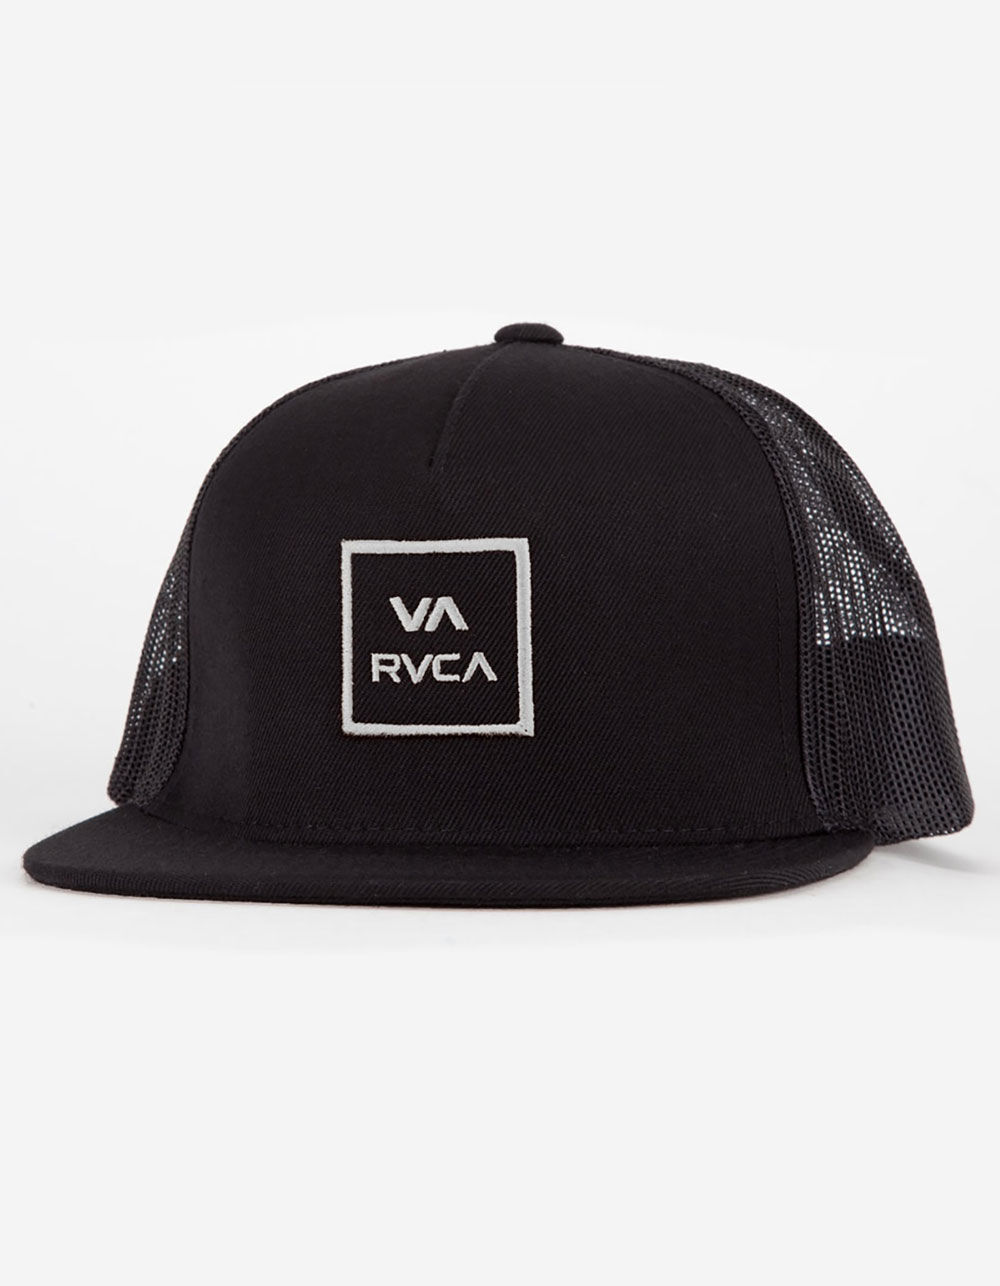 RVCA All The Way Mens Trucker Hat image number 0